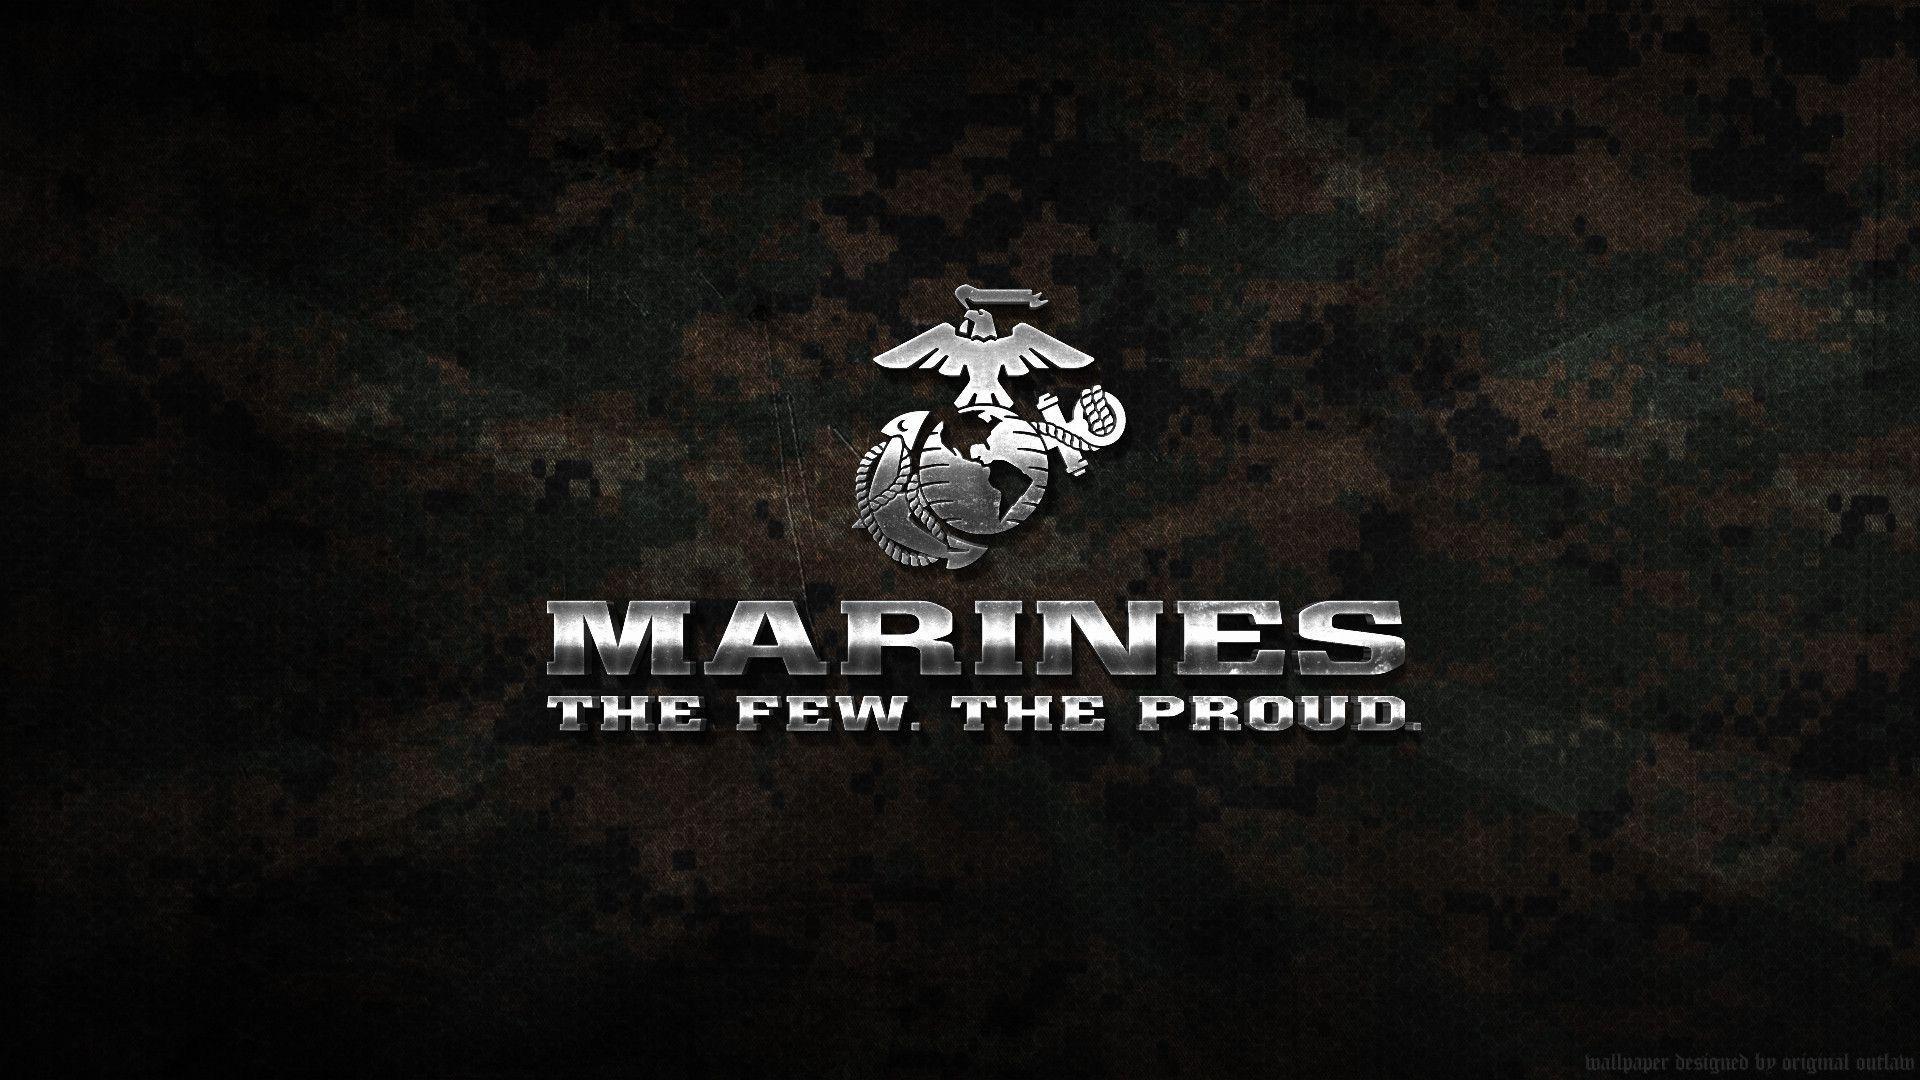 Us Marine Corps Wallpaper Images amp Pictures   Becuo